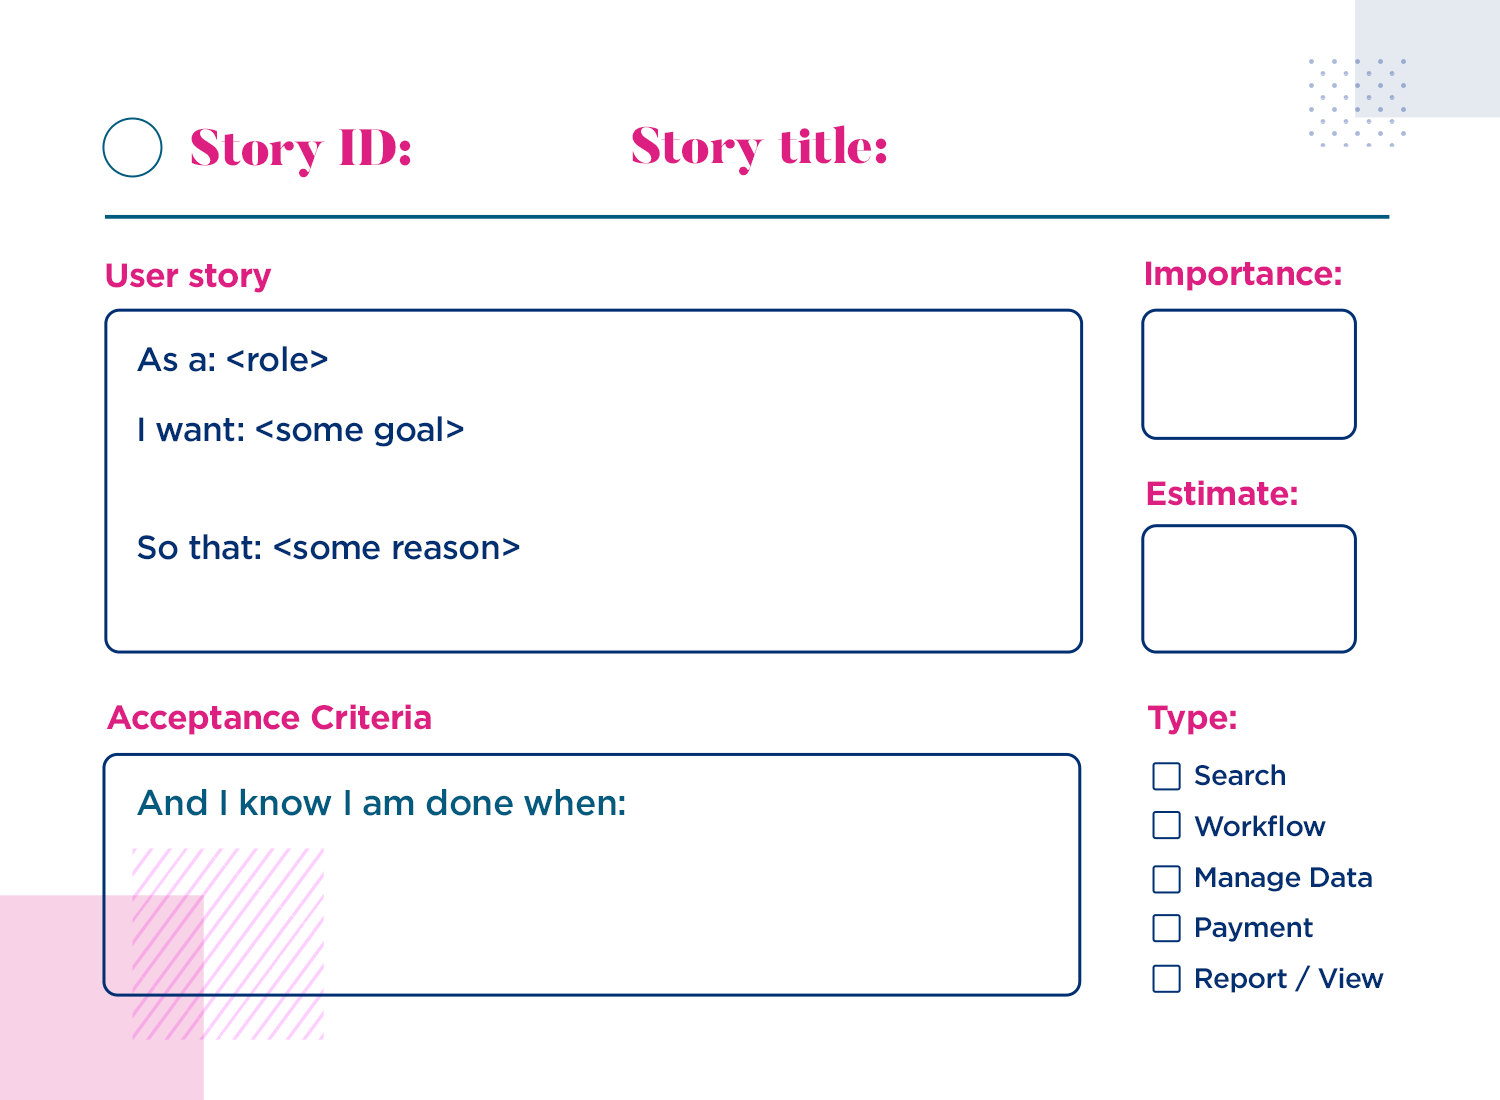 User story template with sections for role, goal, reason, importance, estimate, and acceptance criteria